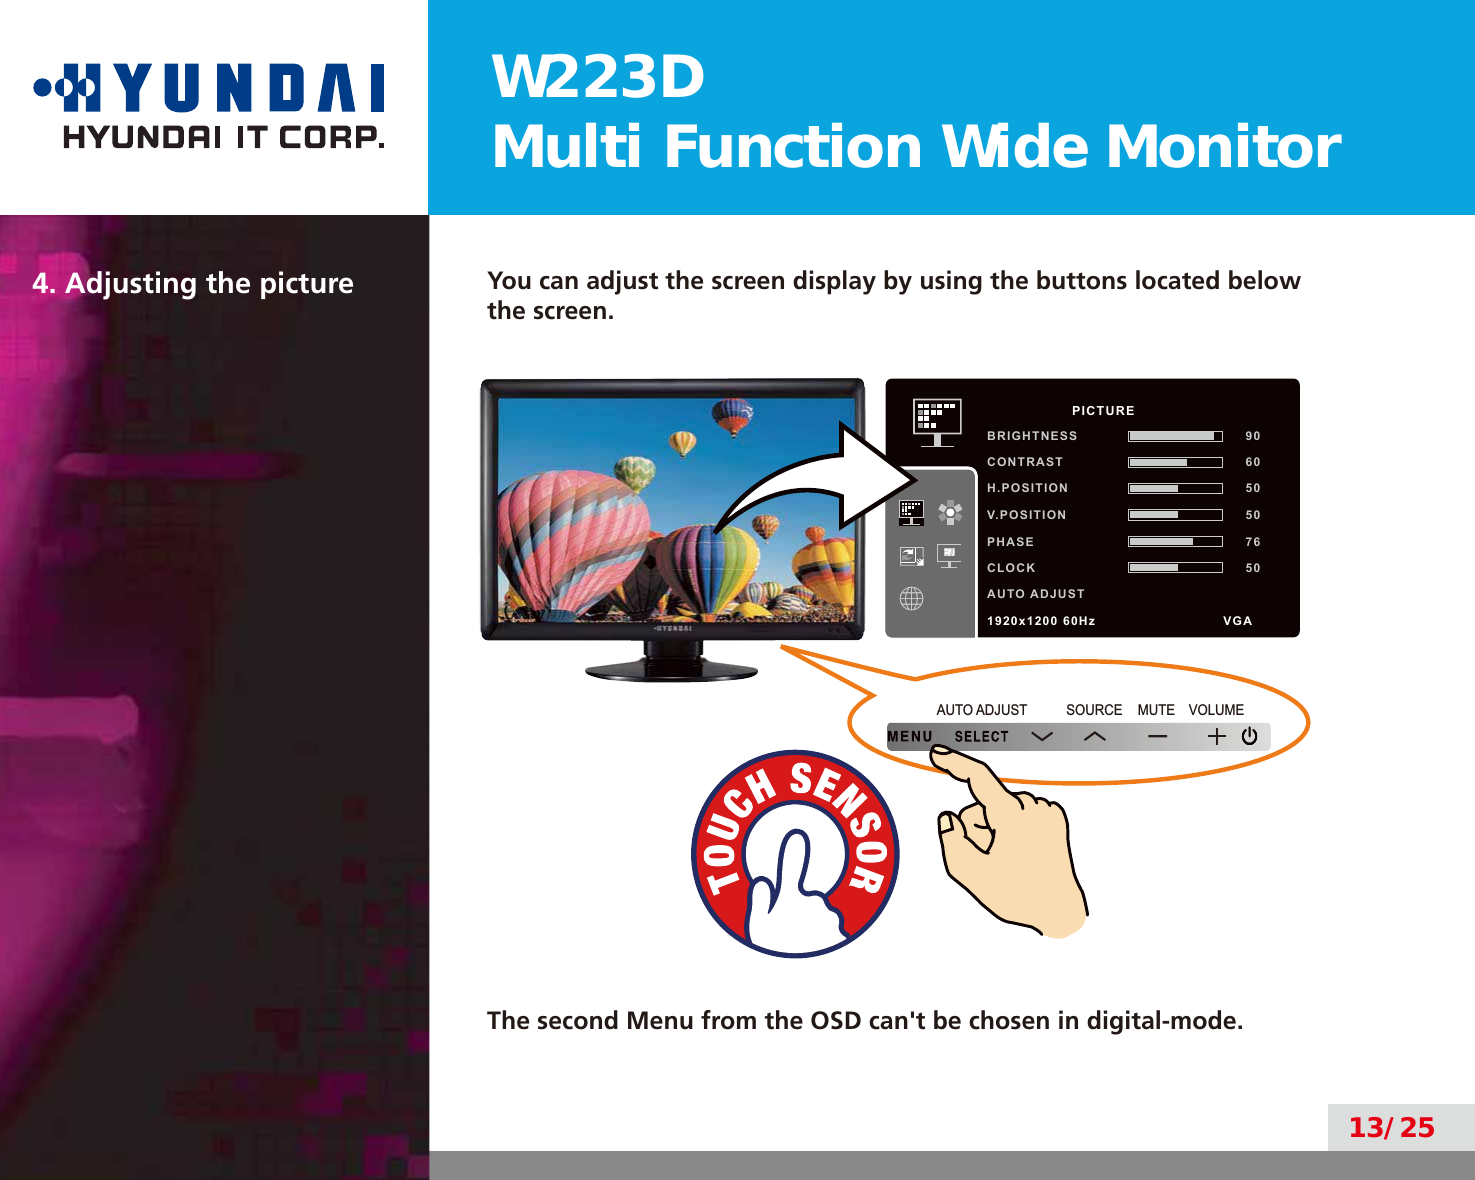 W223DMulti Function Wide Monitor13/254. Adjusting the picture You can adjust the screen display by using the buttons located below the screen.MUTE VOLUMESOURCEAUTO ADJUSTThe second Menu from the OSD can&apos;t be chosen in digital-mode.          PICTUREBRIGHTNESS 90CONTRAST 60H.POSITION 50V.POSITION 50PHASE 76CLOCK 50AUTO ADJUST1920x1200 60Hz               VGA